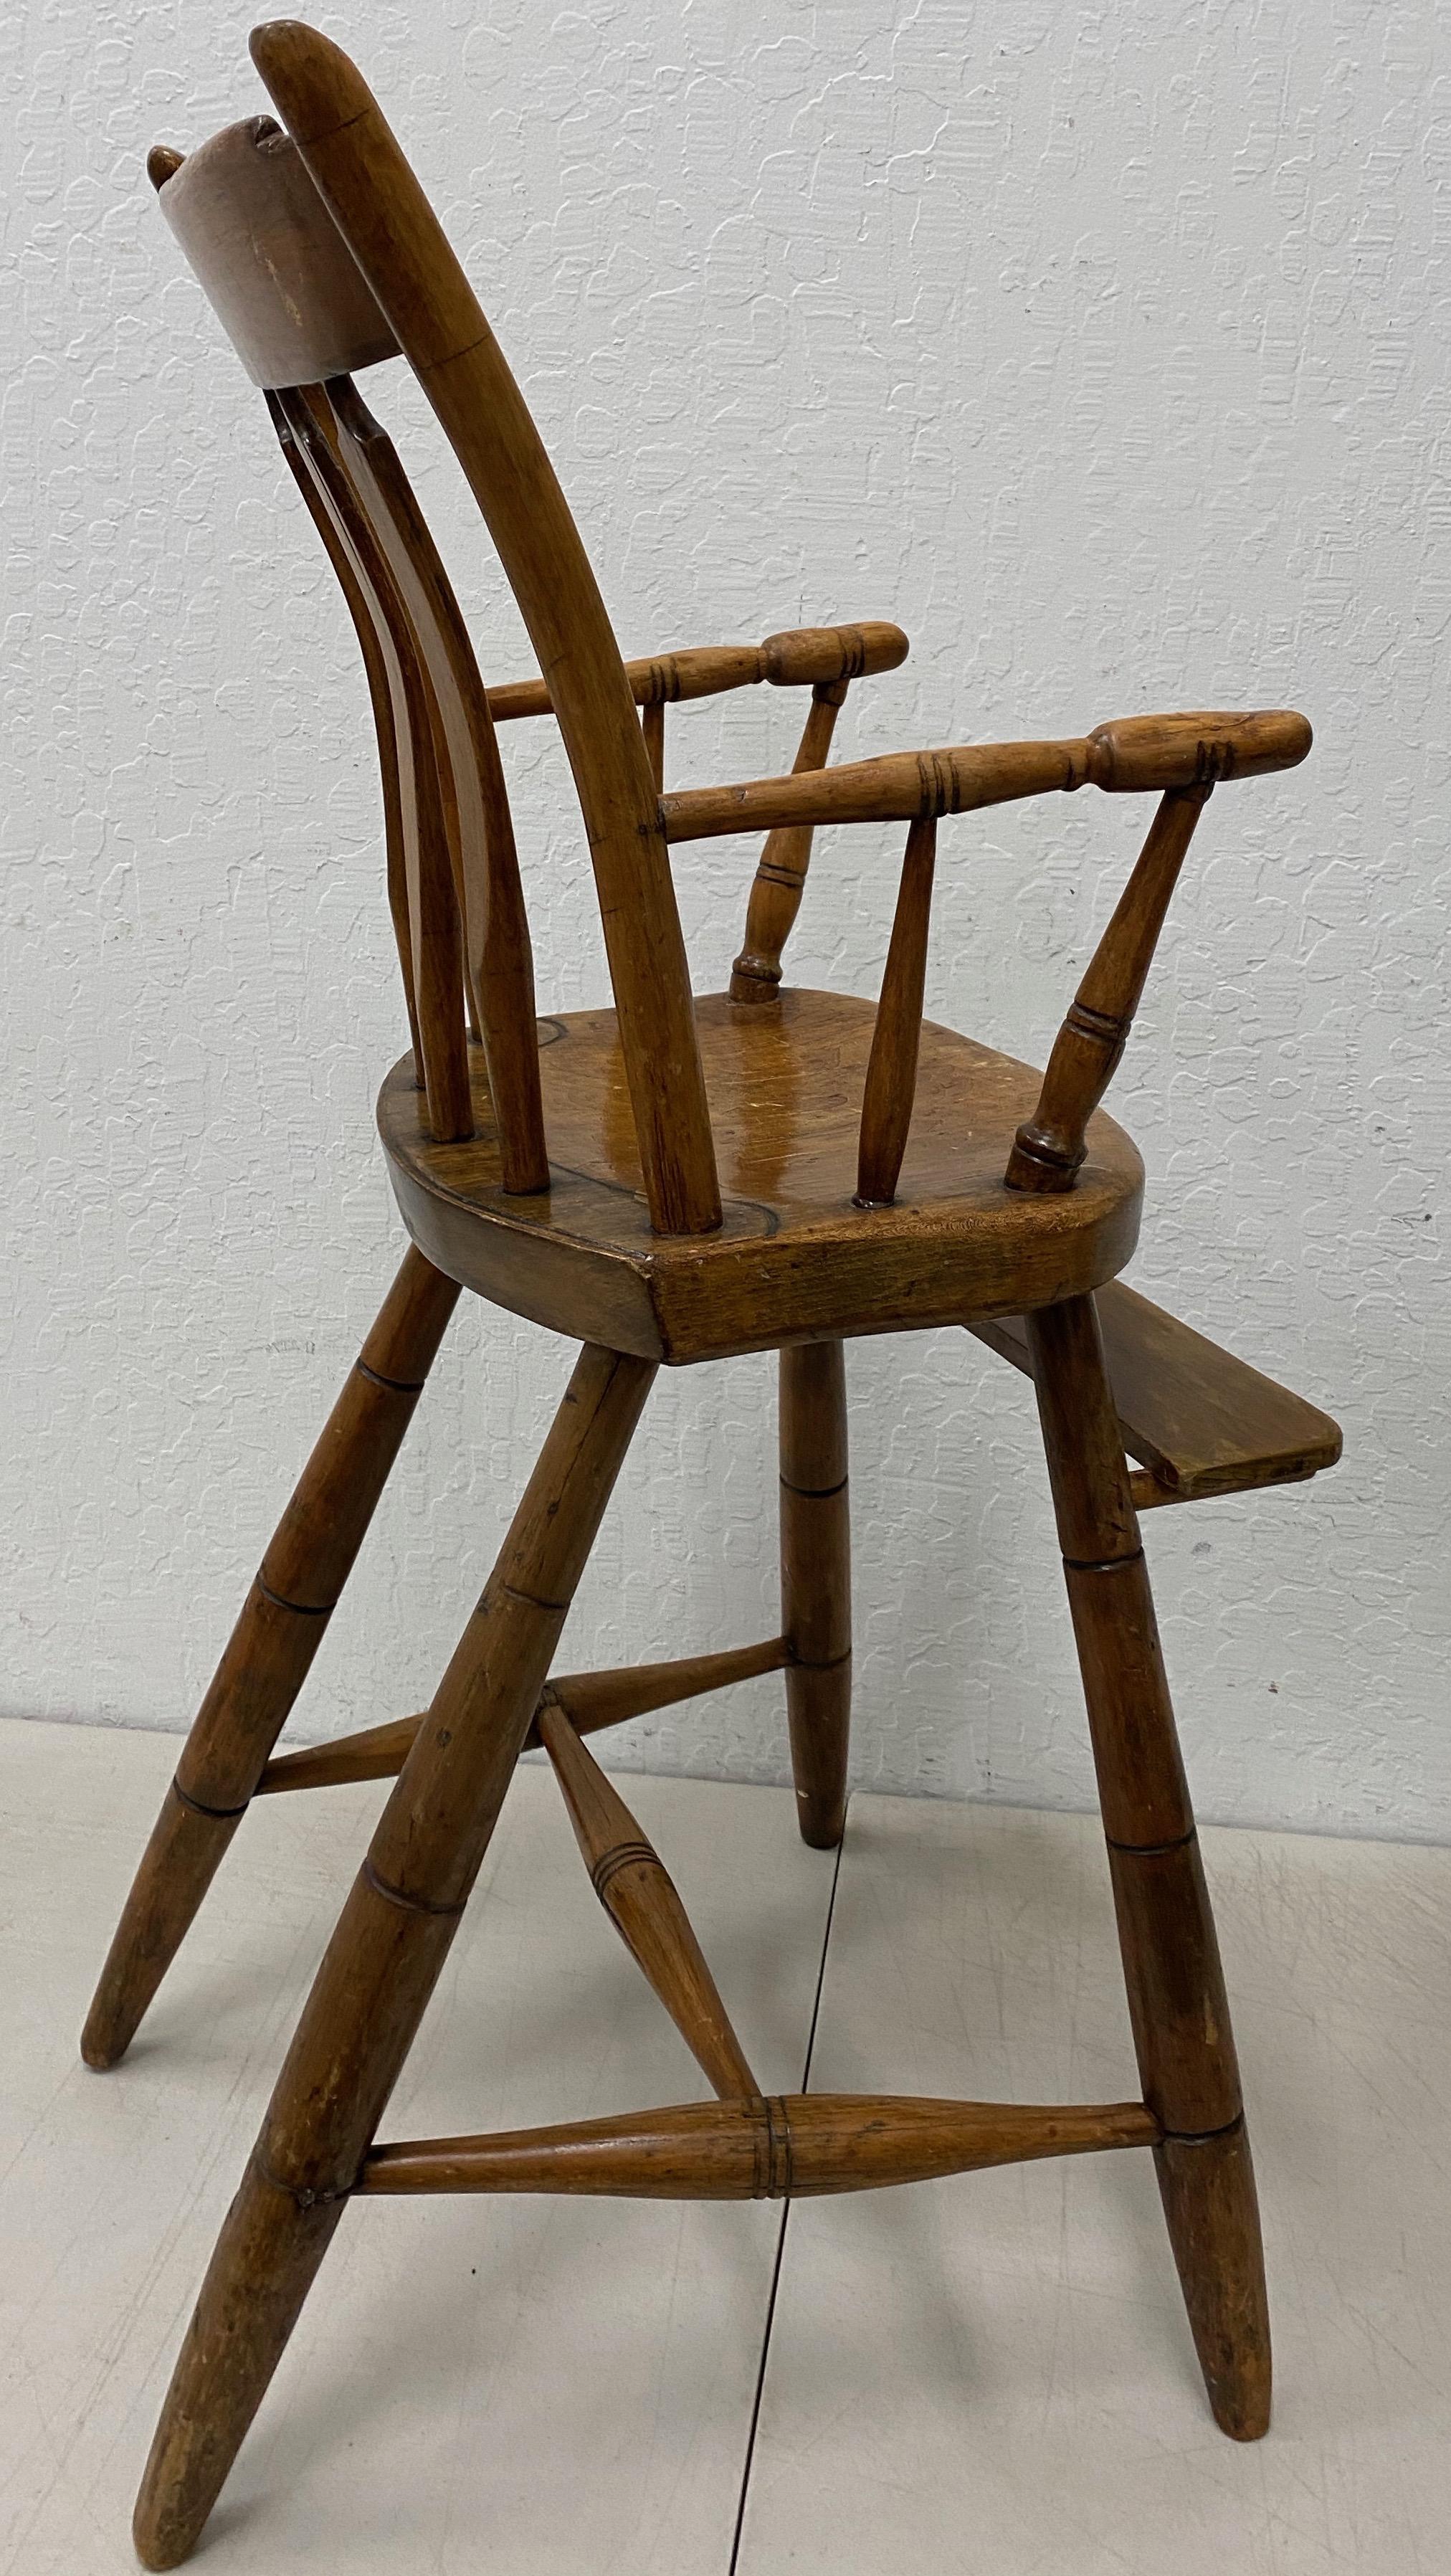 Wood 19th Century American Child's High Chair